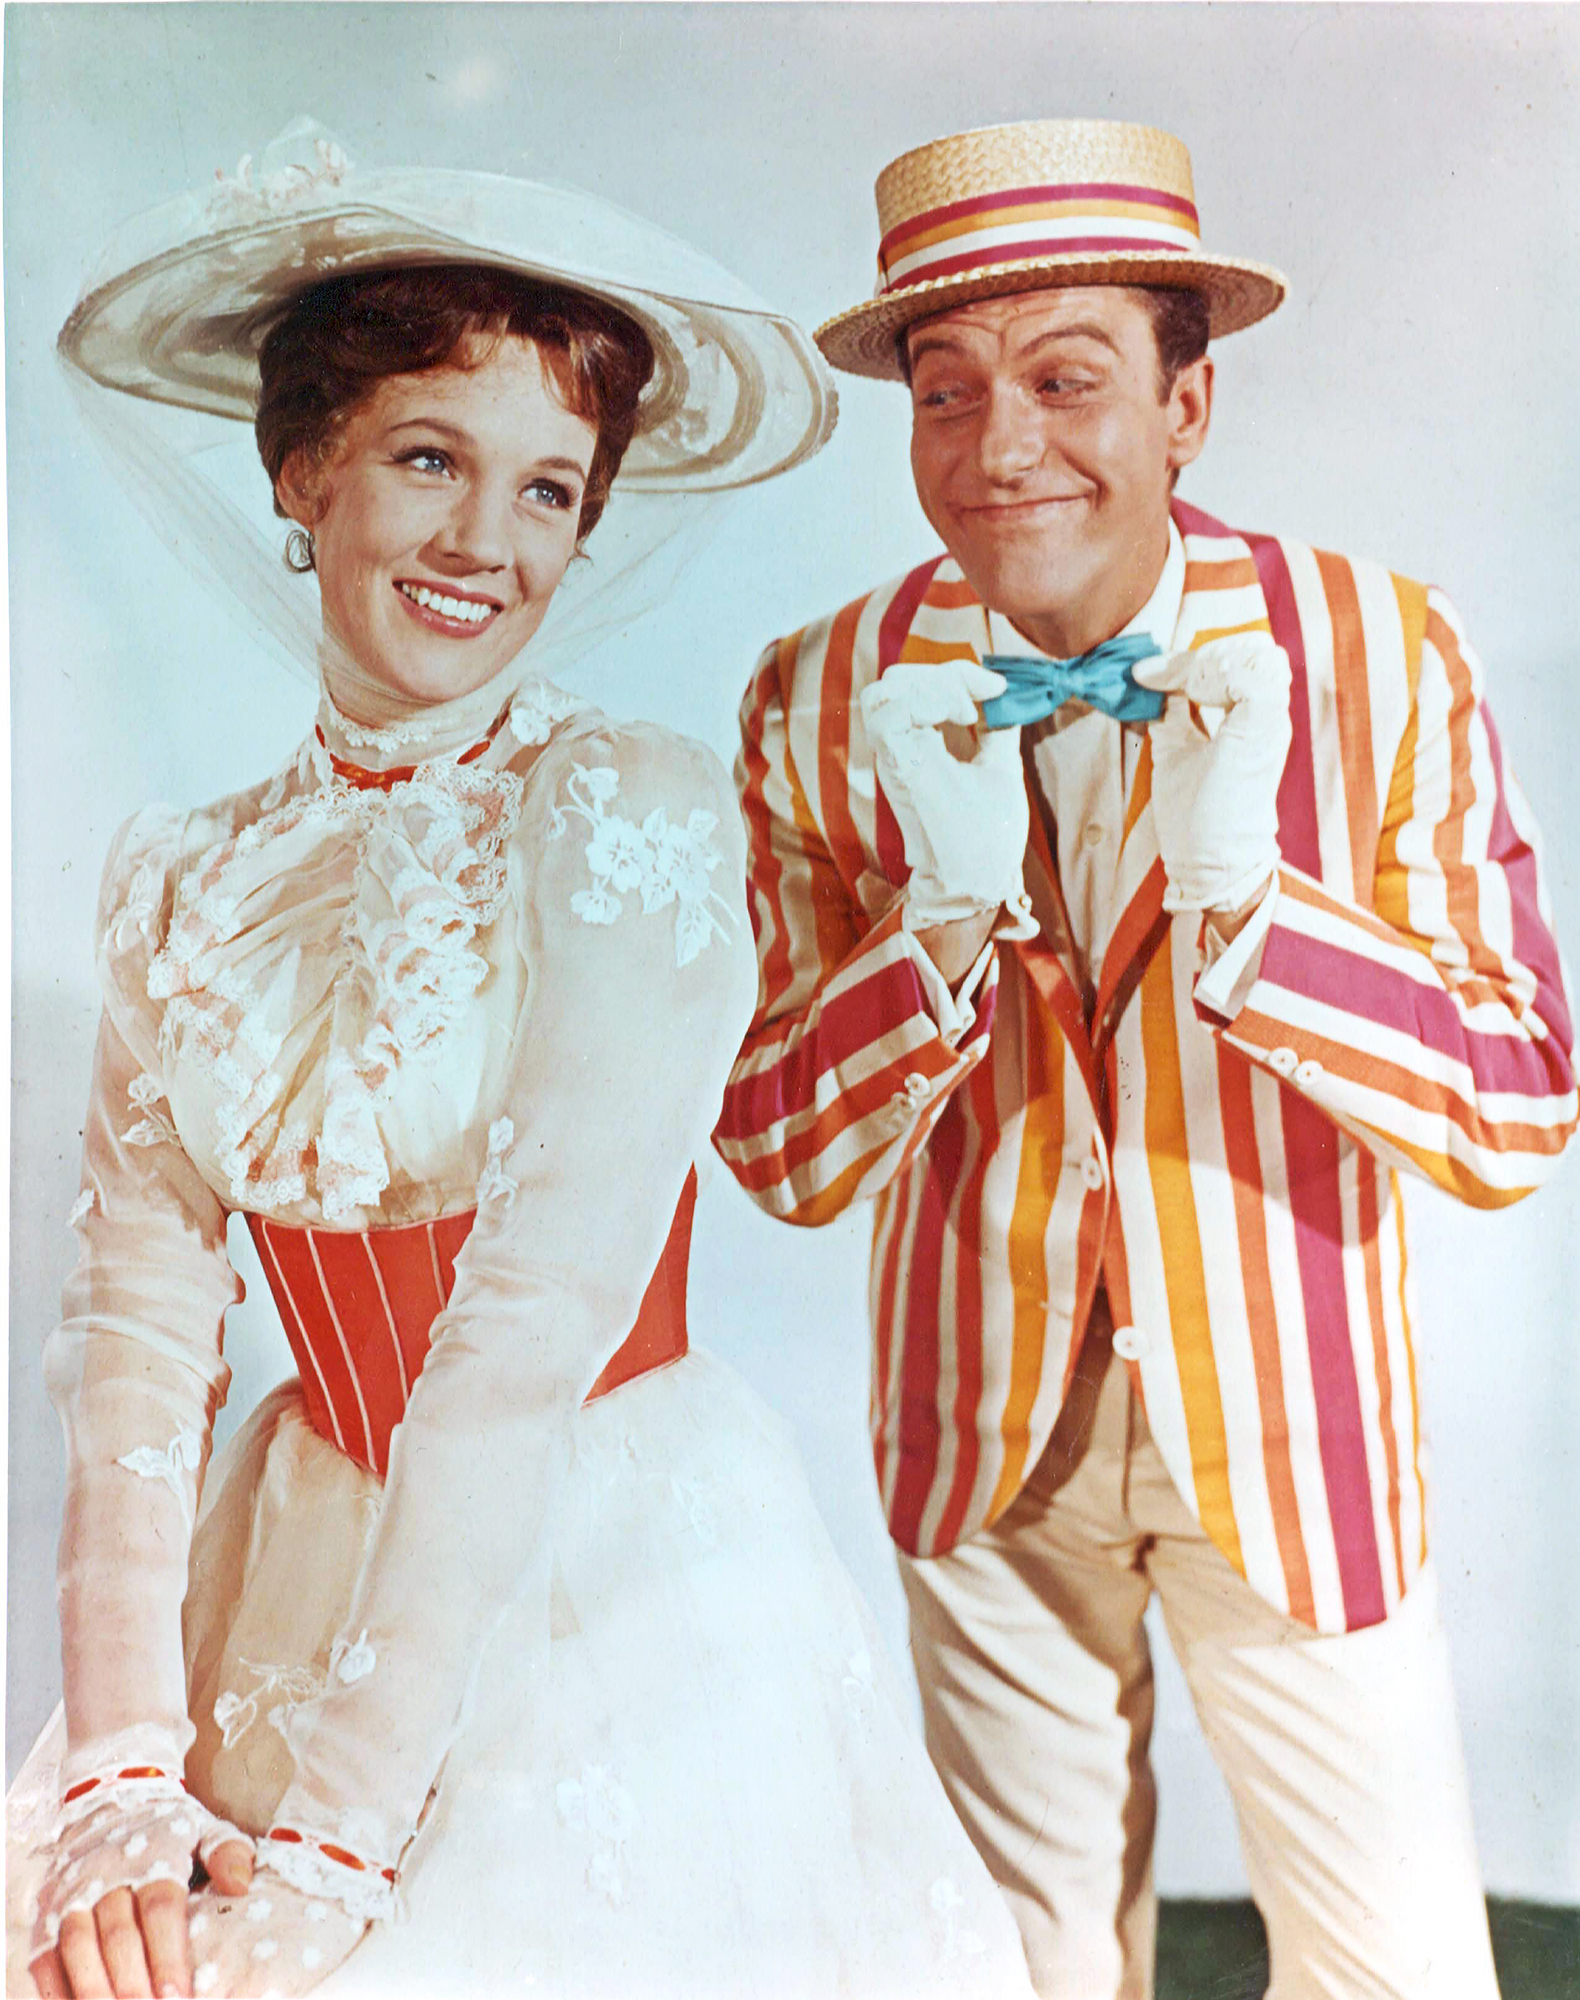 Dick Van Dyke Recalls Filming ‘Mary Poppins’ With ‘Gorgeous’ Julie Andrews